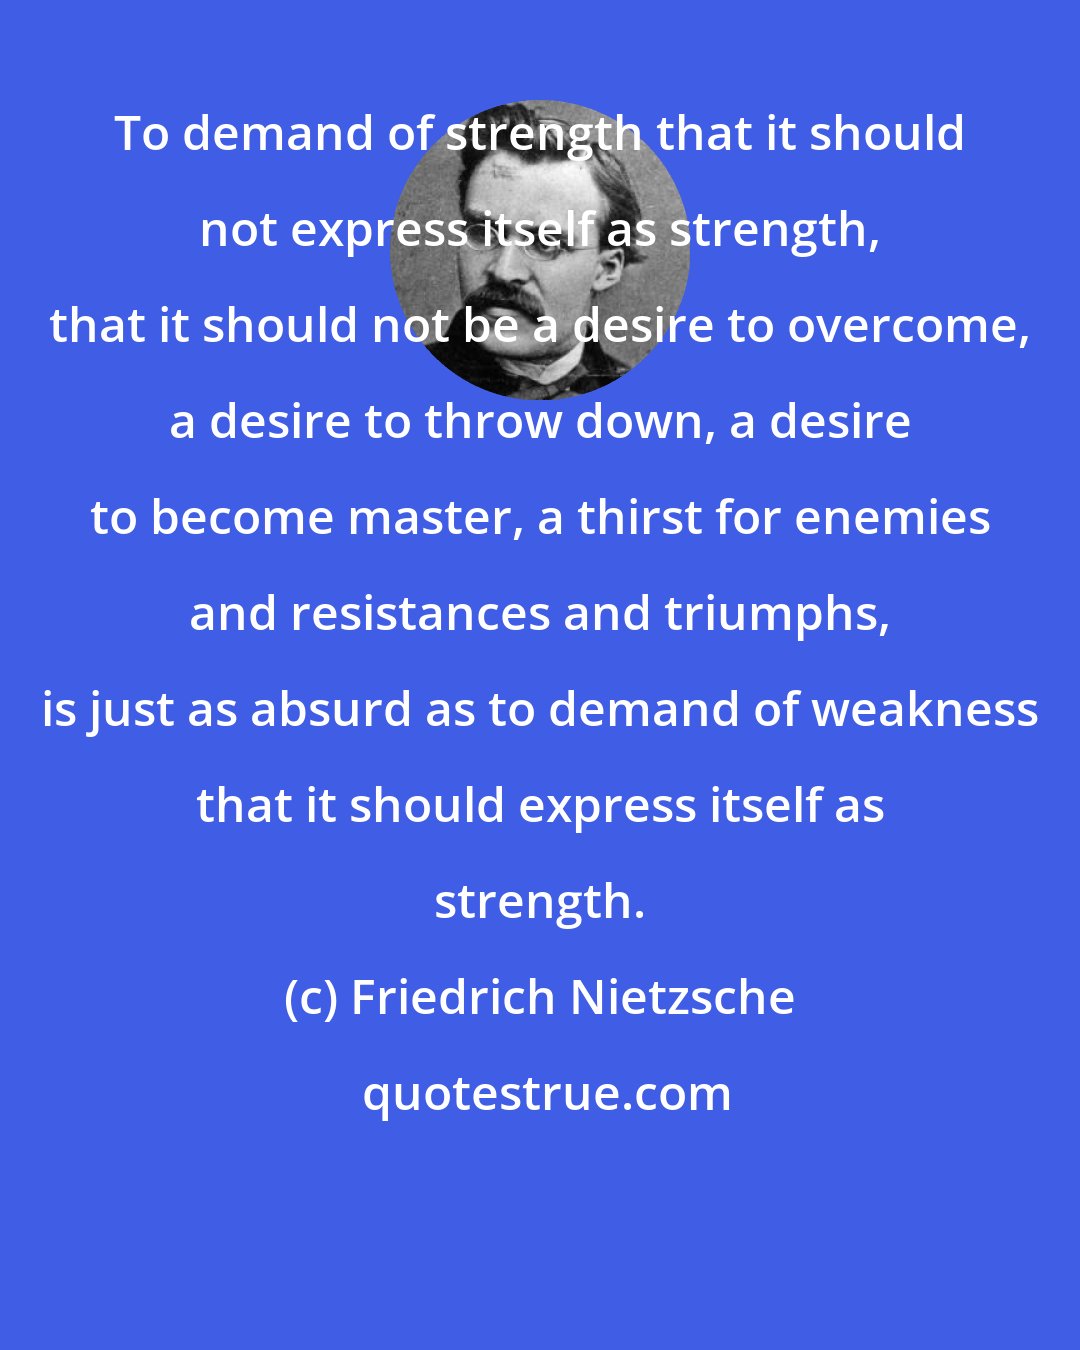 Friedrich Nietzsche: To demand of strength that it should not express itself as strength, that it should not be a desire to overcome, a desire to throw down, a desire to become master, a thirst for enemies and resistances and triumphs, is just as absurd as to demand of weakness that it should express itself as strength.